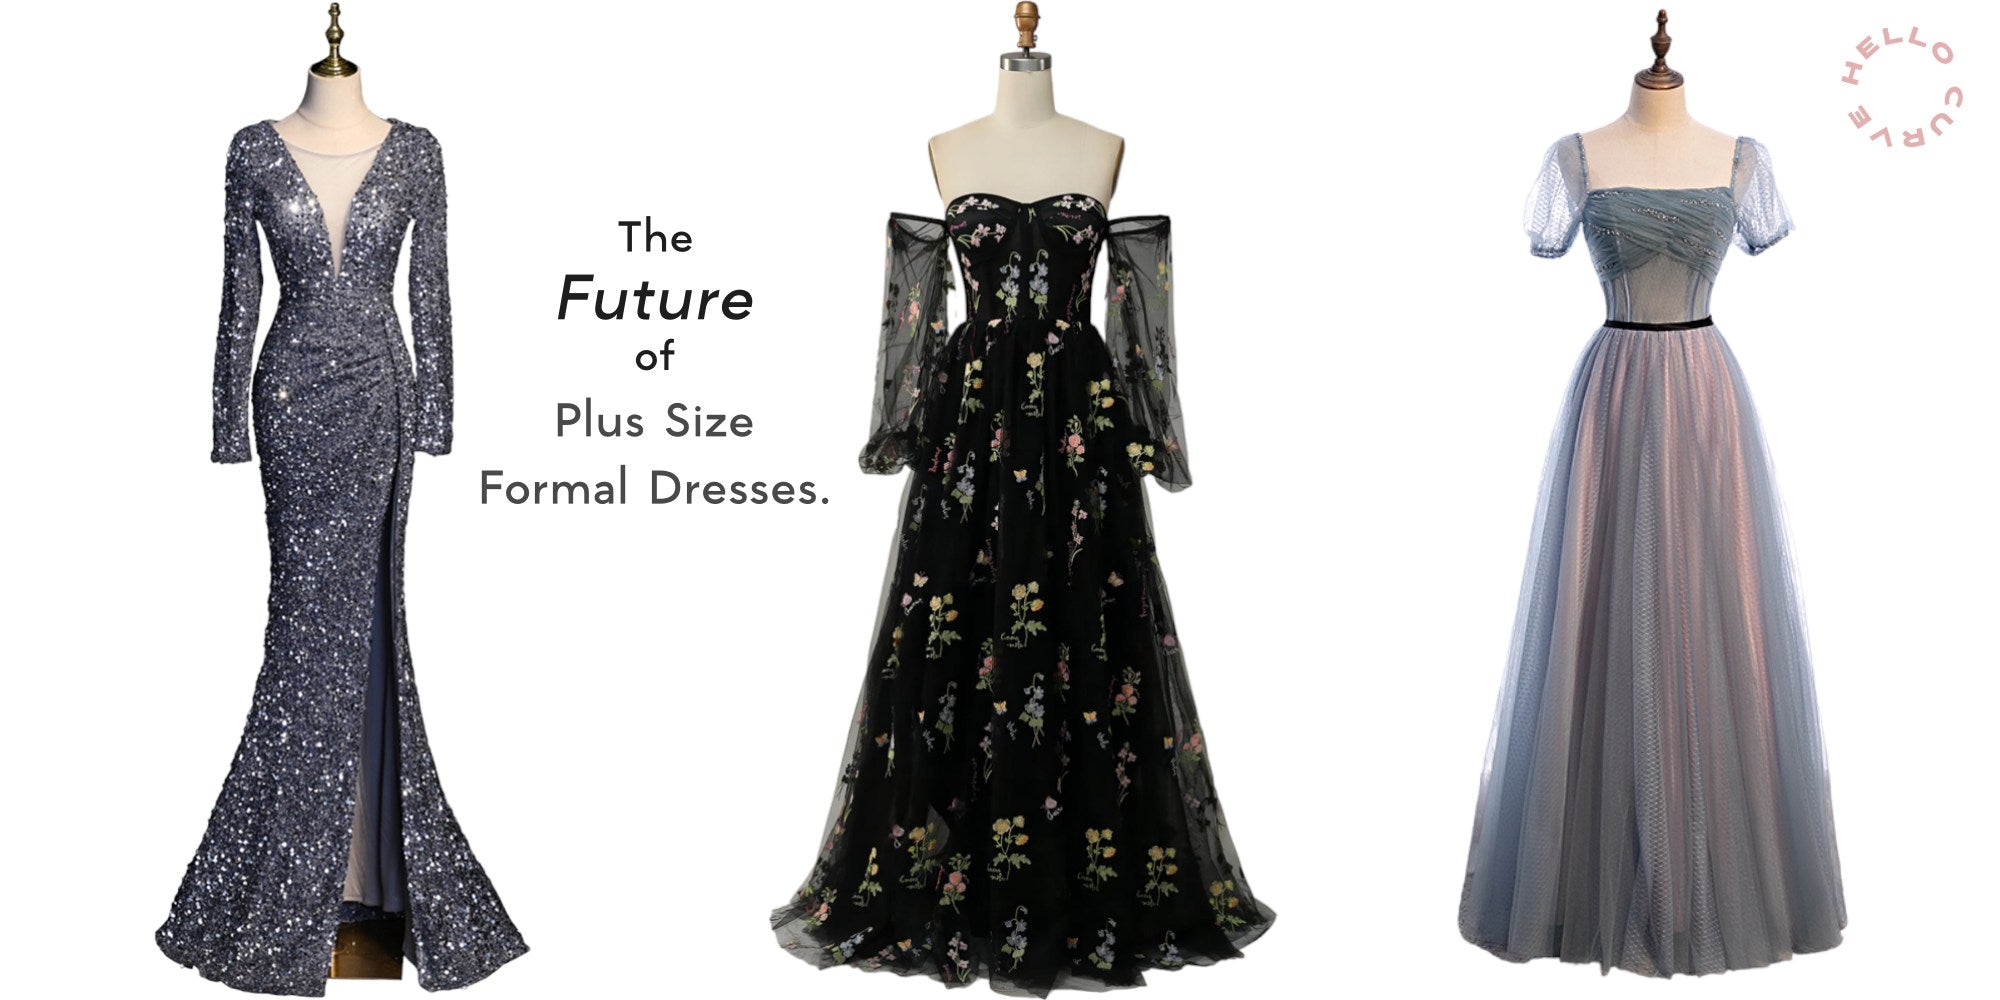 Custom Couture: The Future of Plus Size Formal Dresses